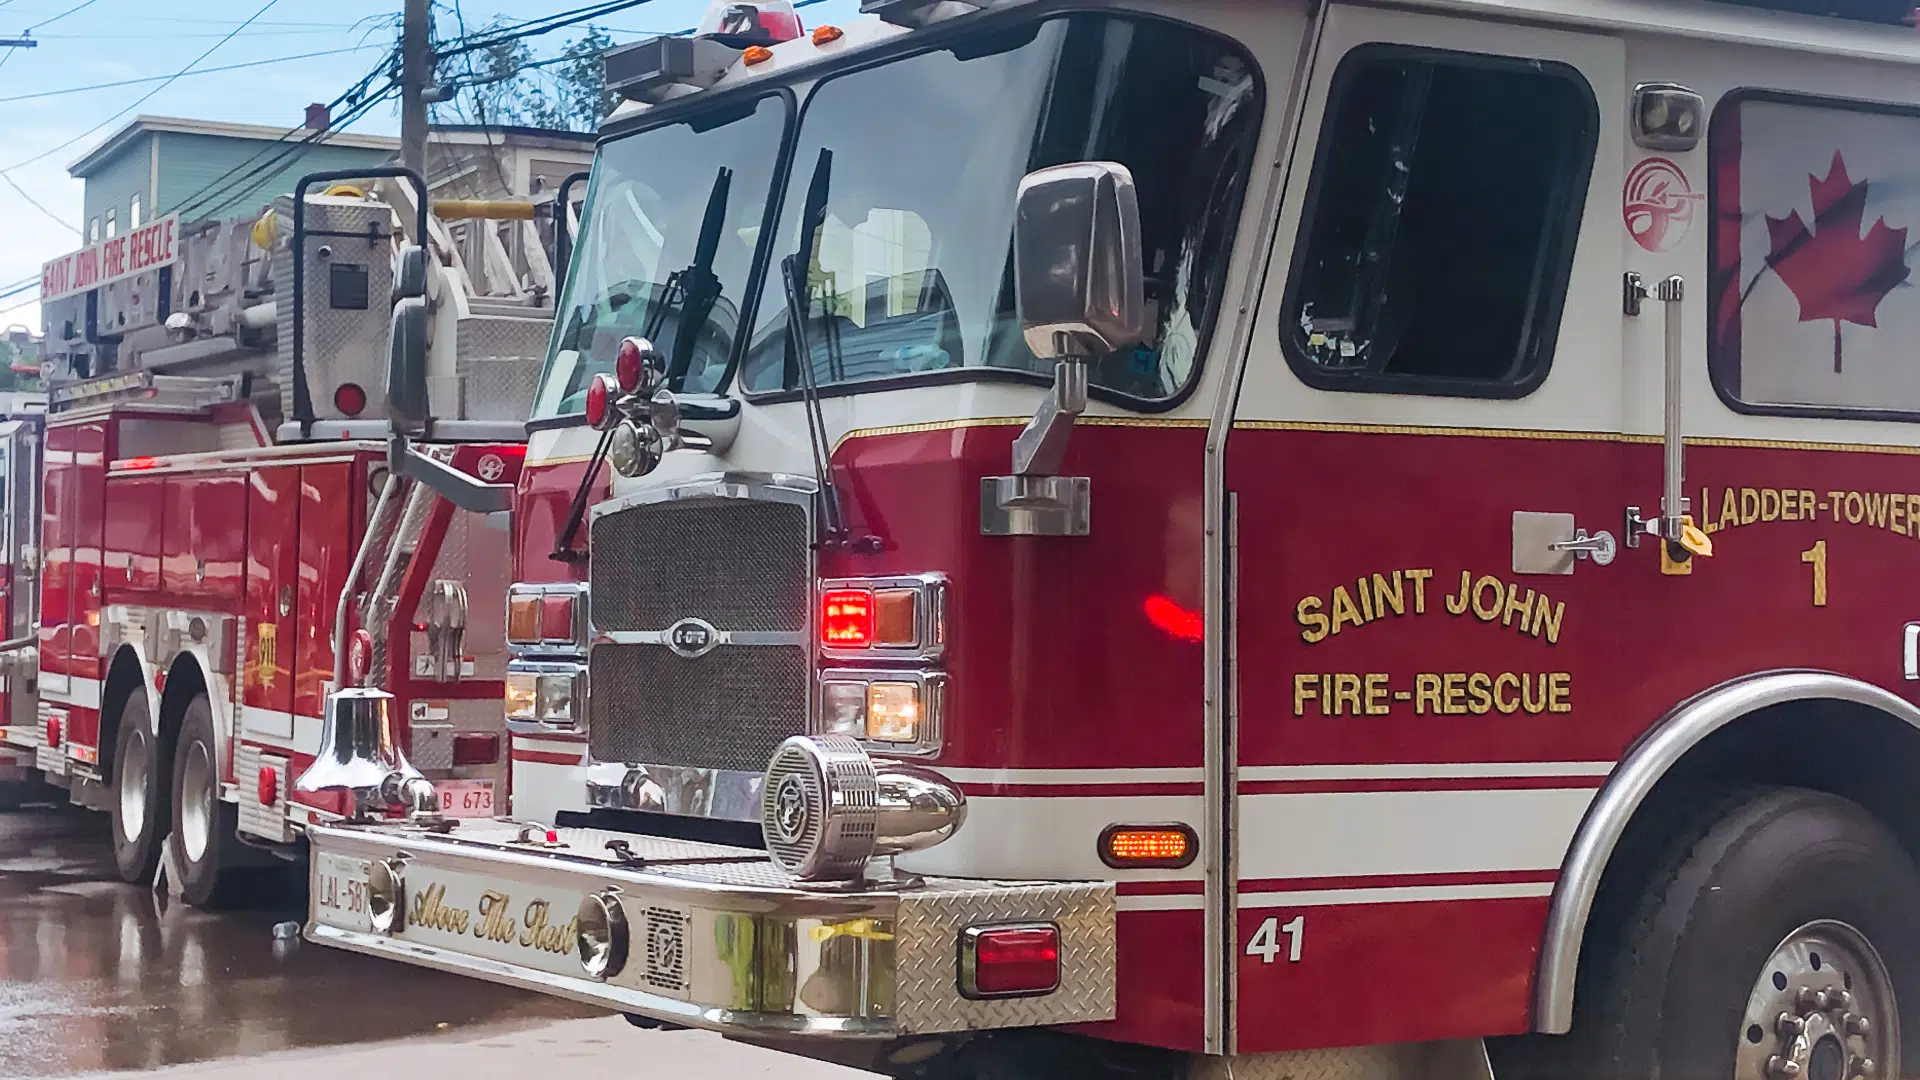 North End Fire Displaces Five People